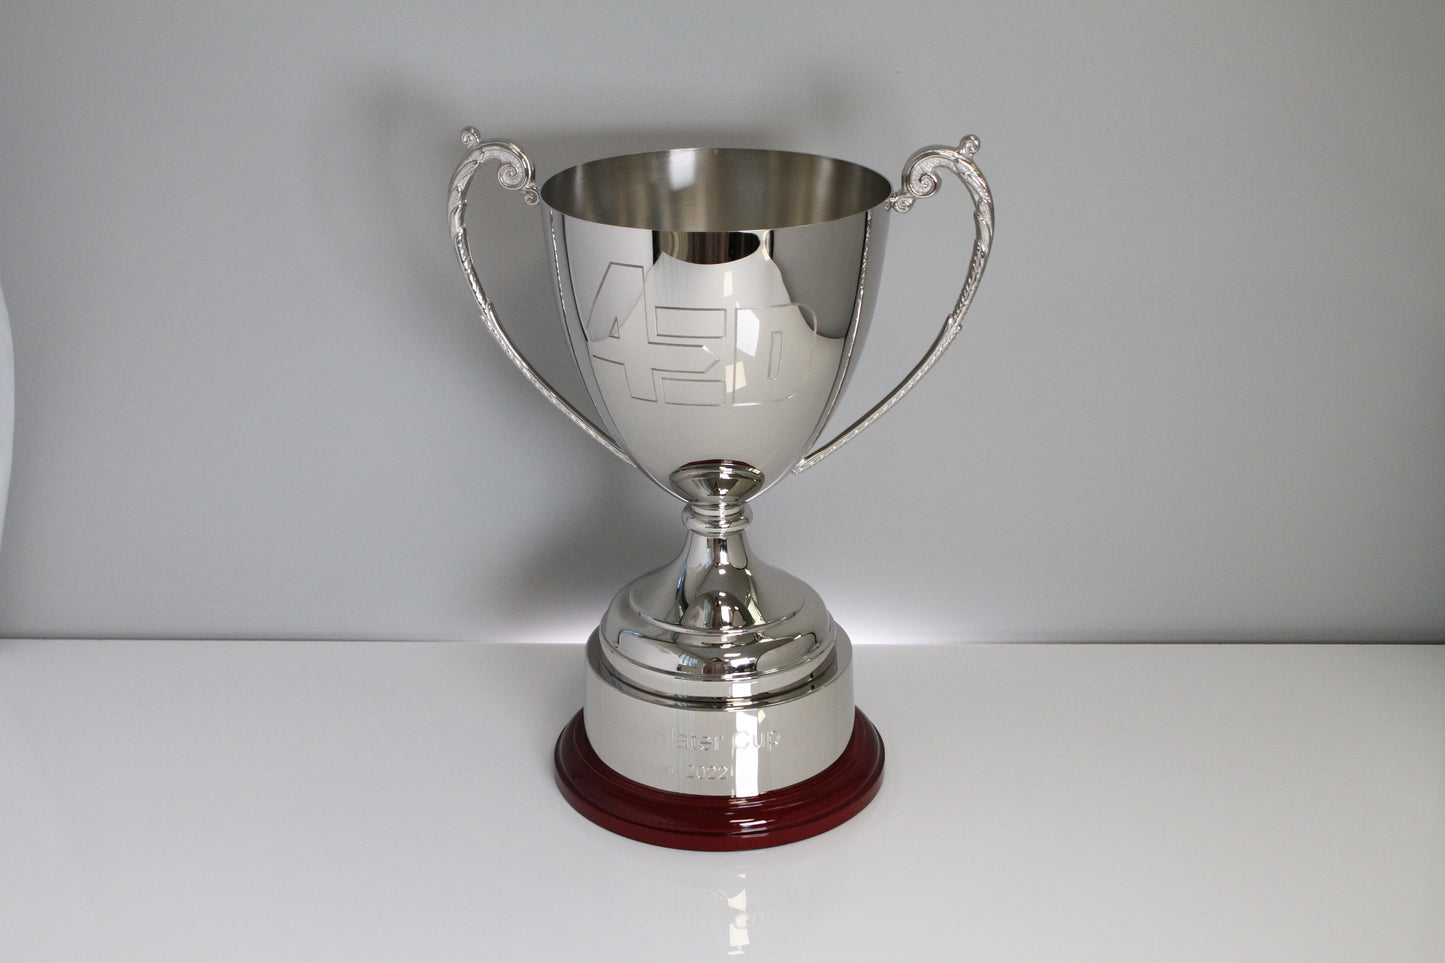 Prestigious Cup - Buckingham Series - Revolution Handmade Cup - Available in 3 Sizes